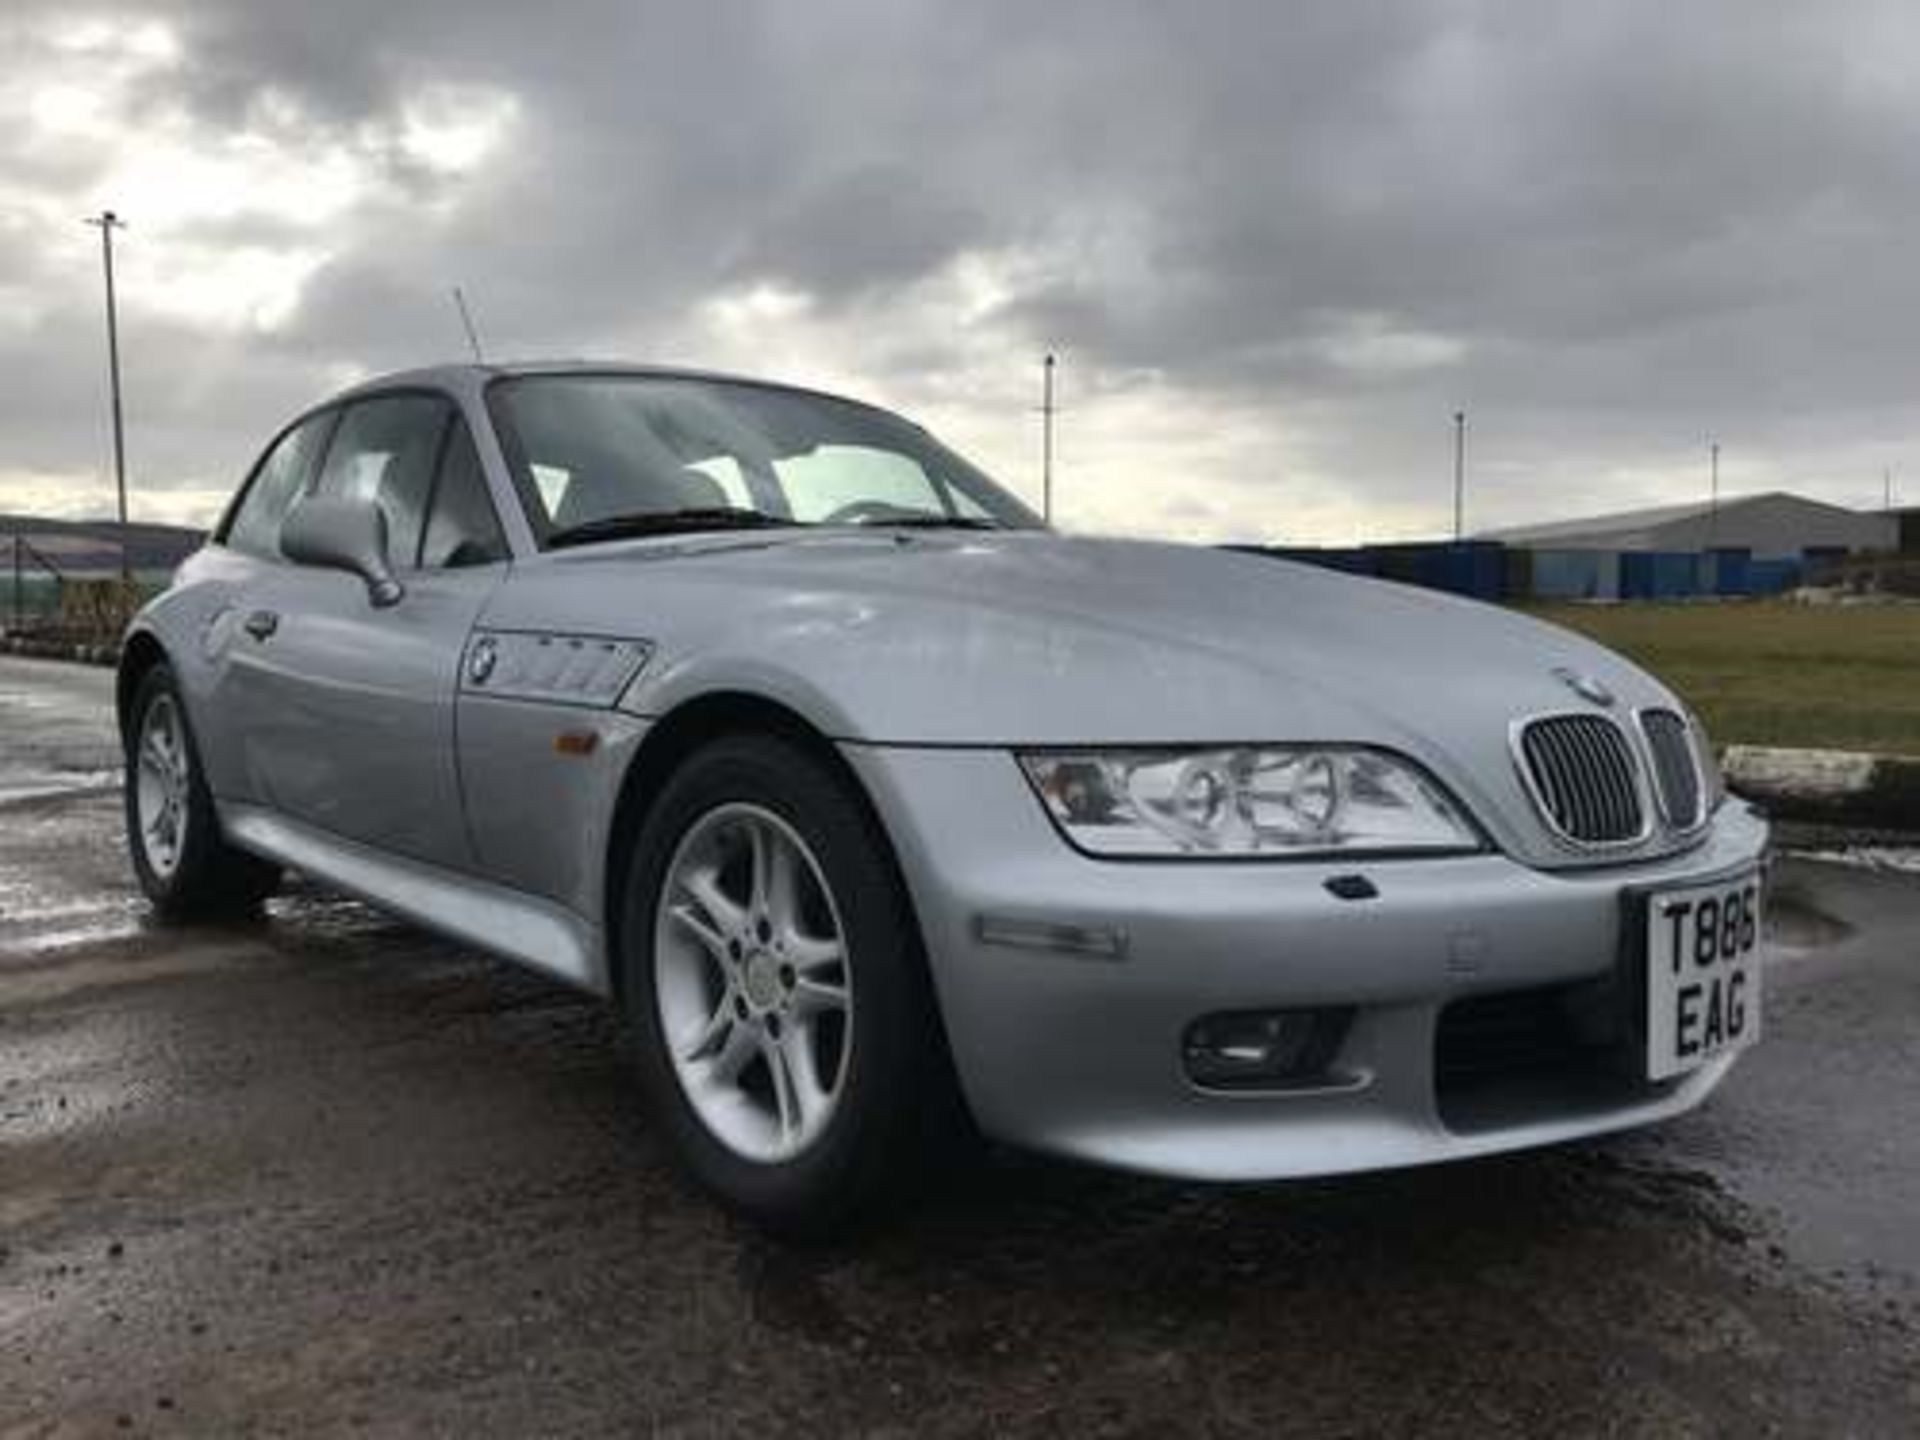 BMW Z3 COUPE- 2865cc - Image 2 of 32